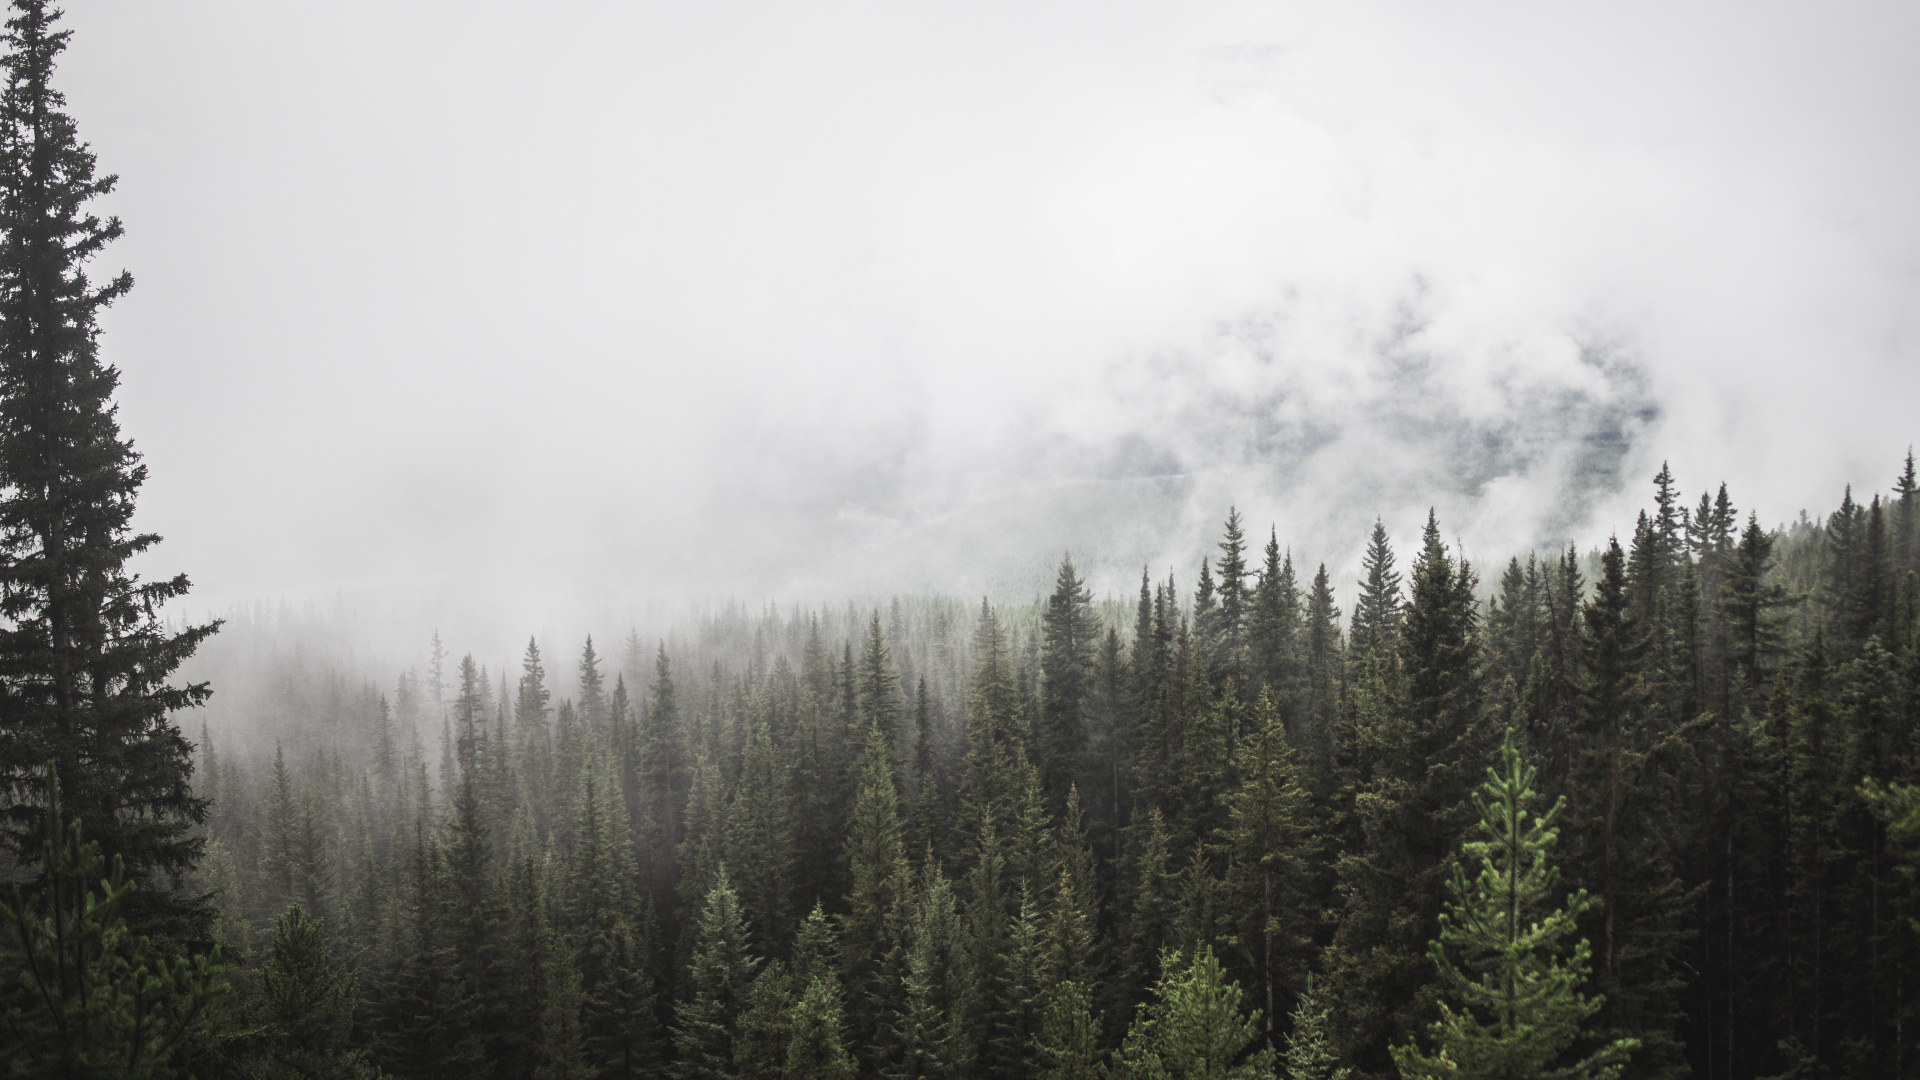 Green Pine Trees Covered With Fog. Wallpaper in 1920x1080 Resolution